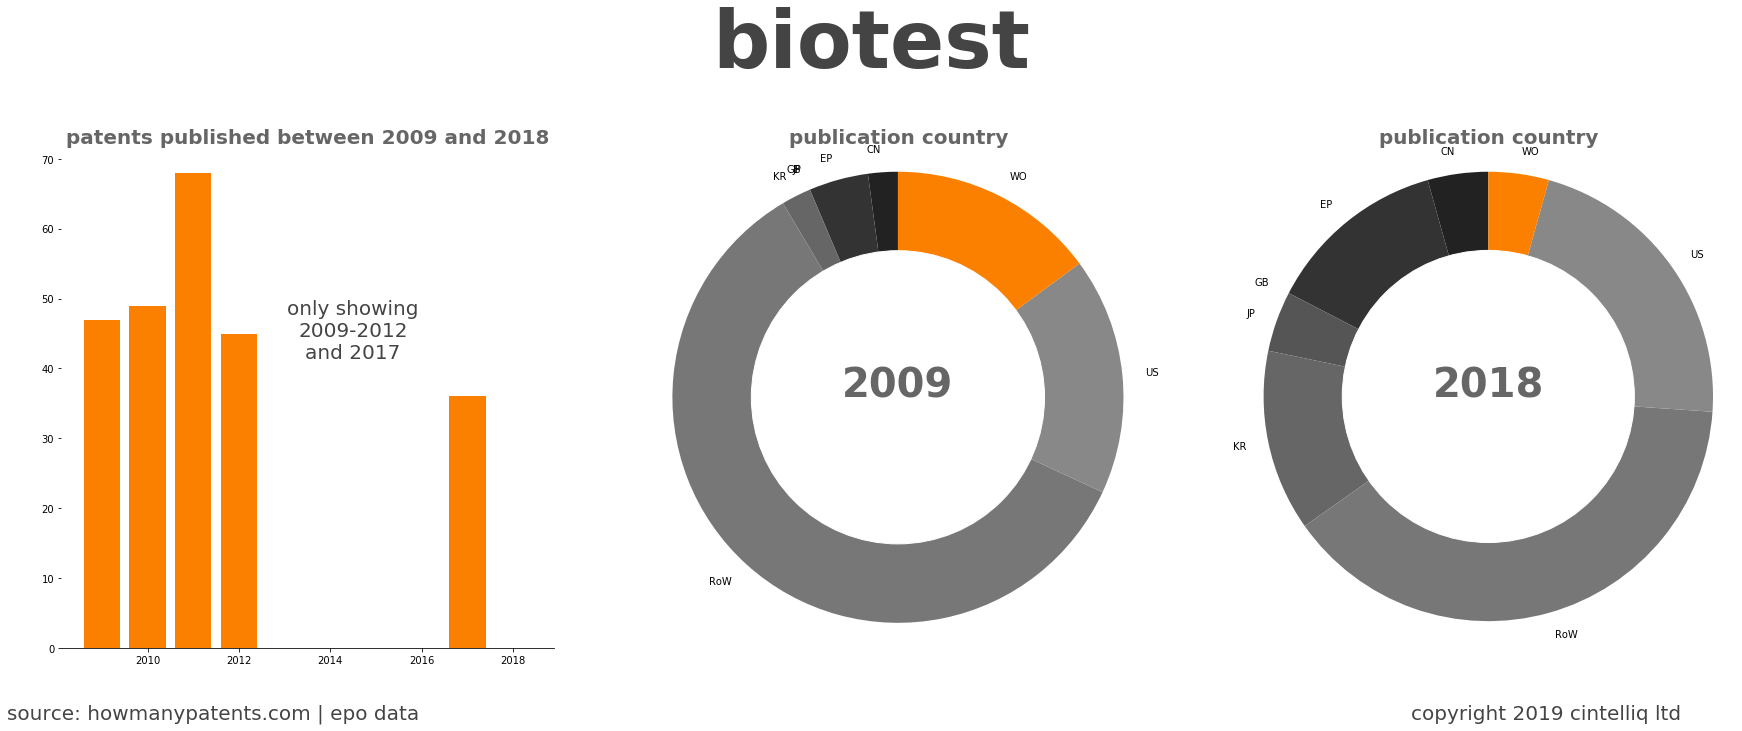 summary of patents for Biotest